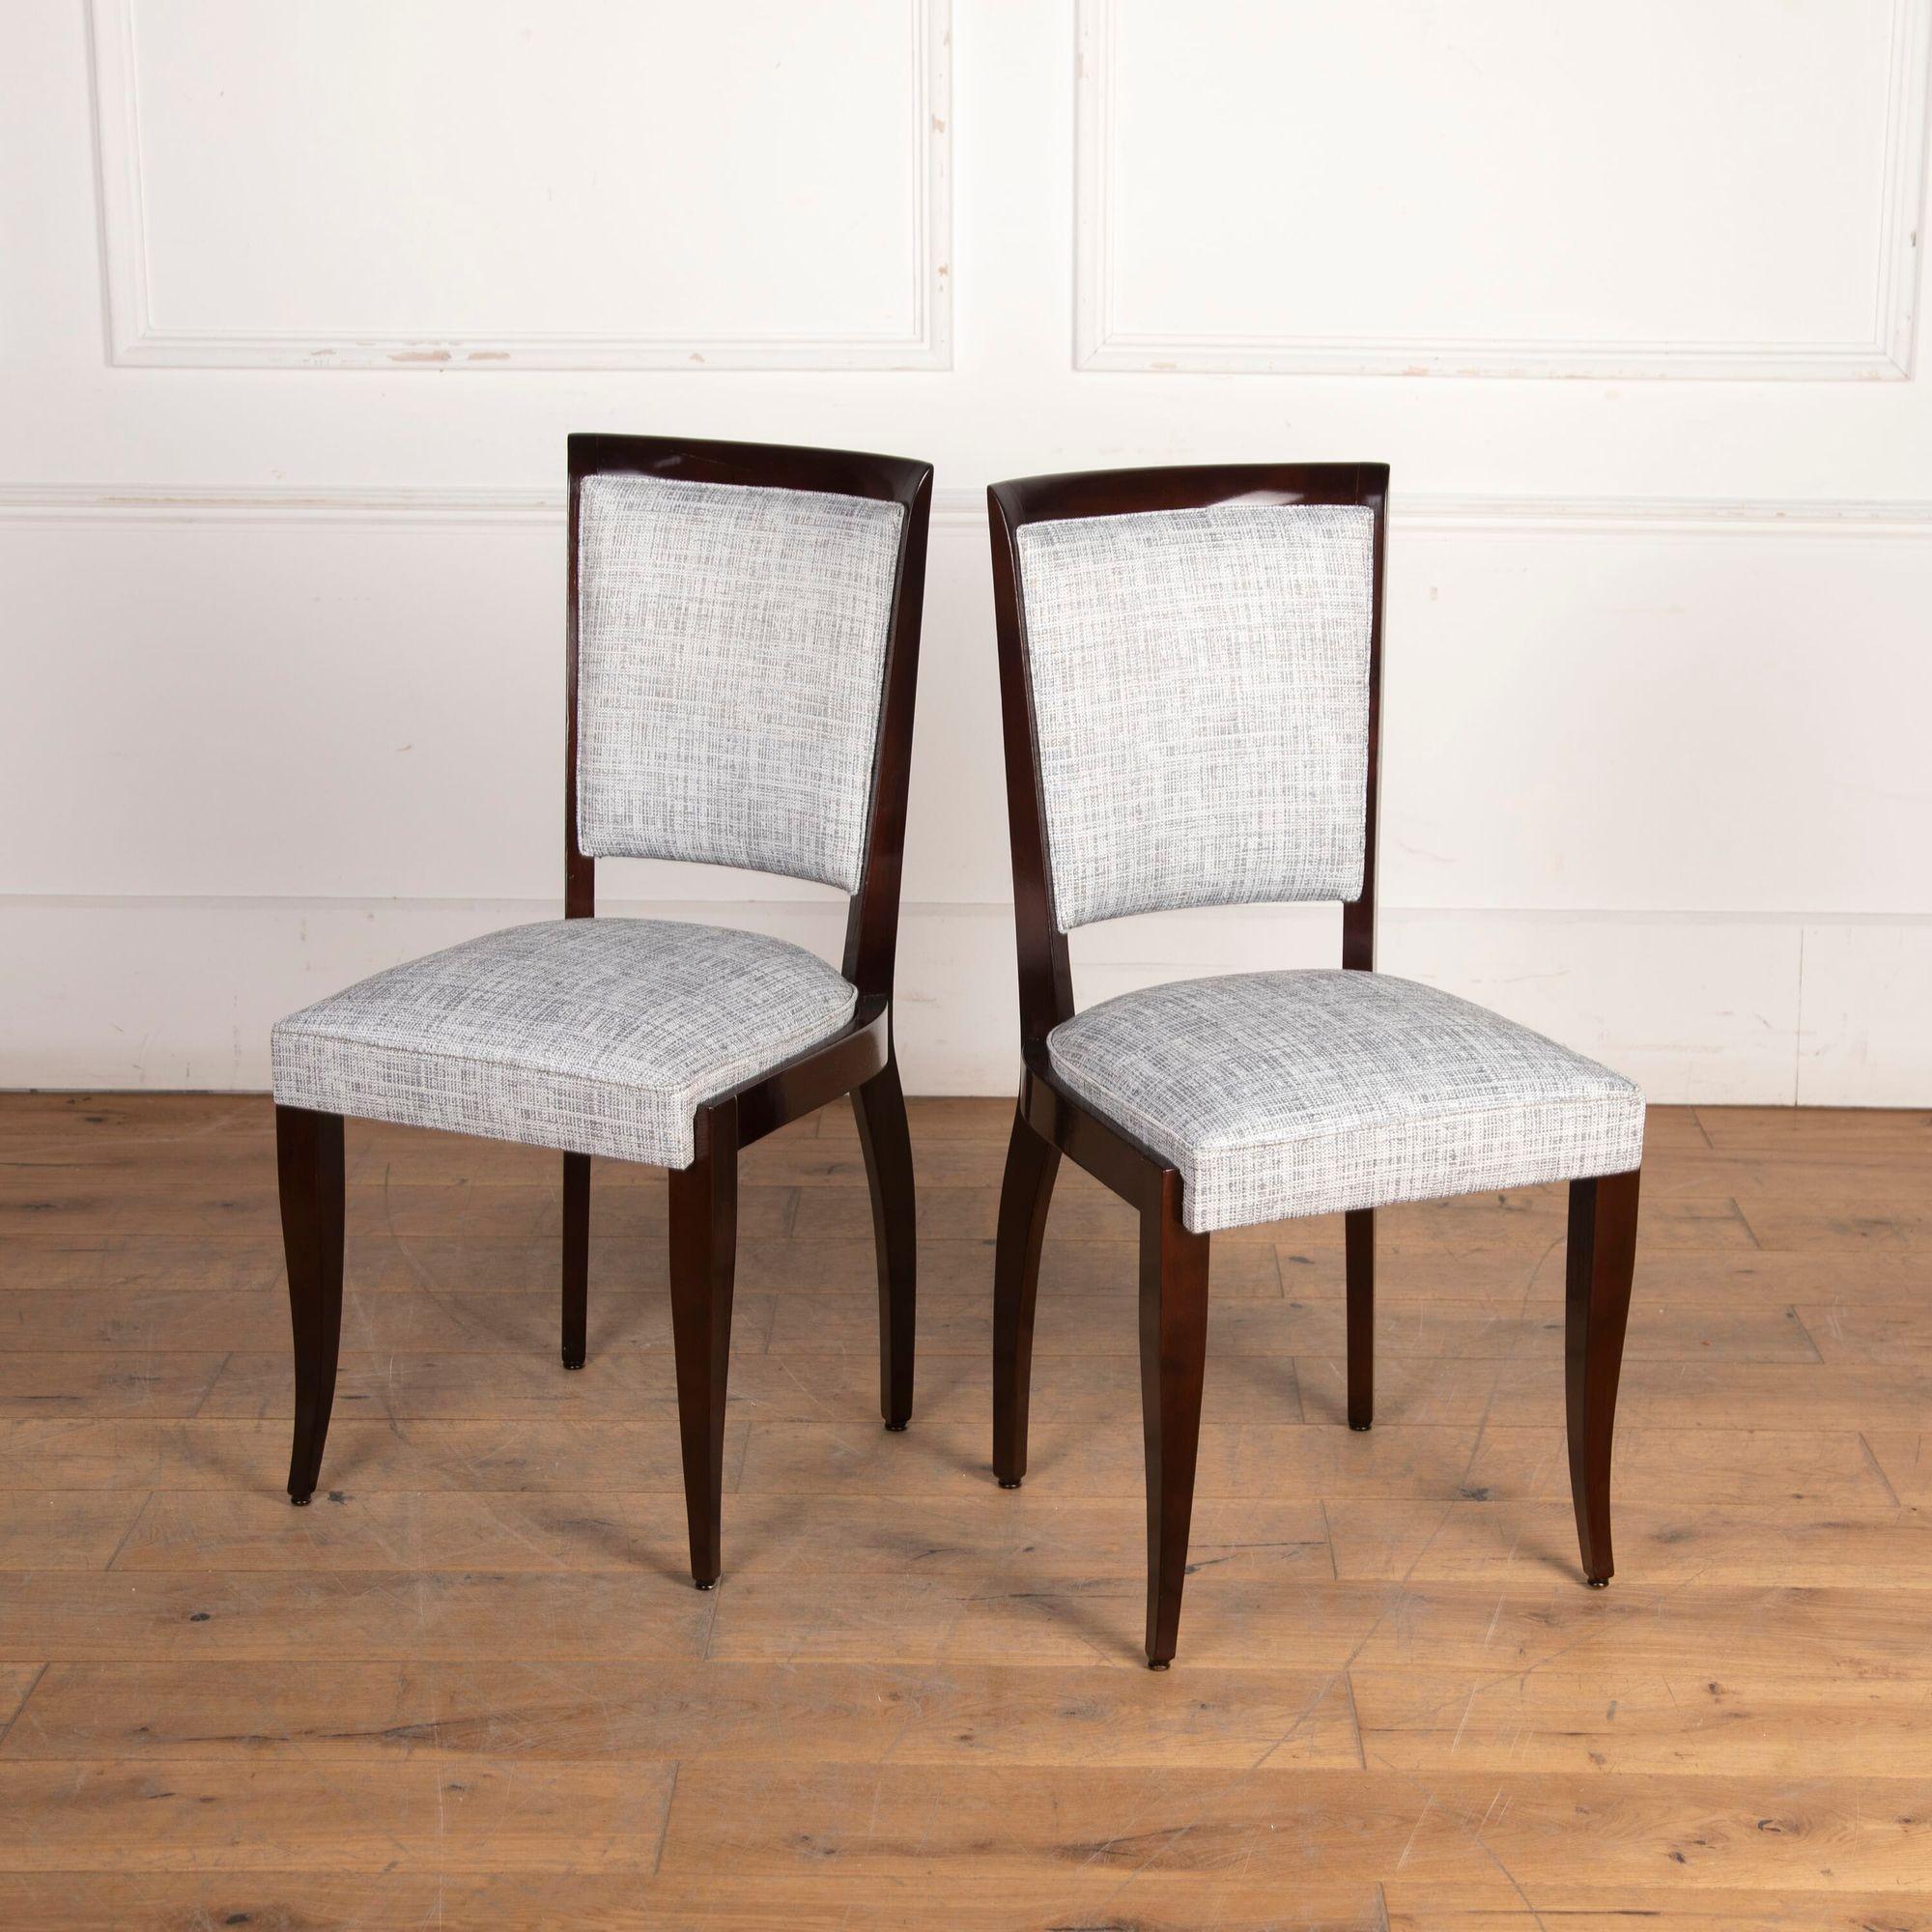 Chic set of six French Art Deco dining chairs. 
Each chair is covered with grey melange colour upholstery and is in a great, stable condition. 
Would suit all interior settings!